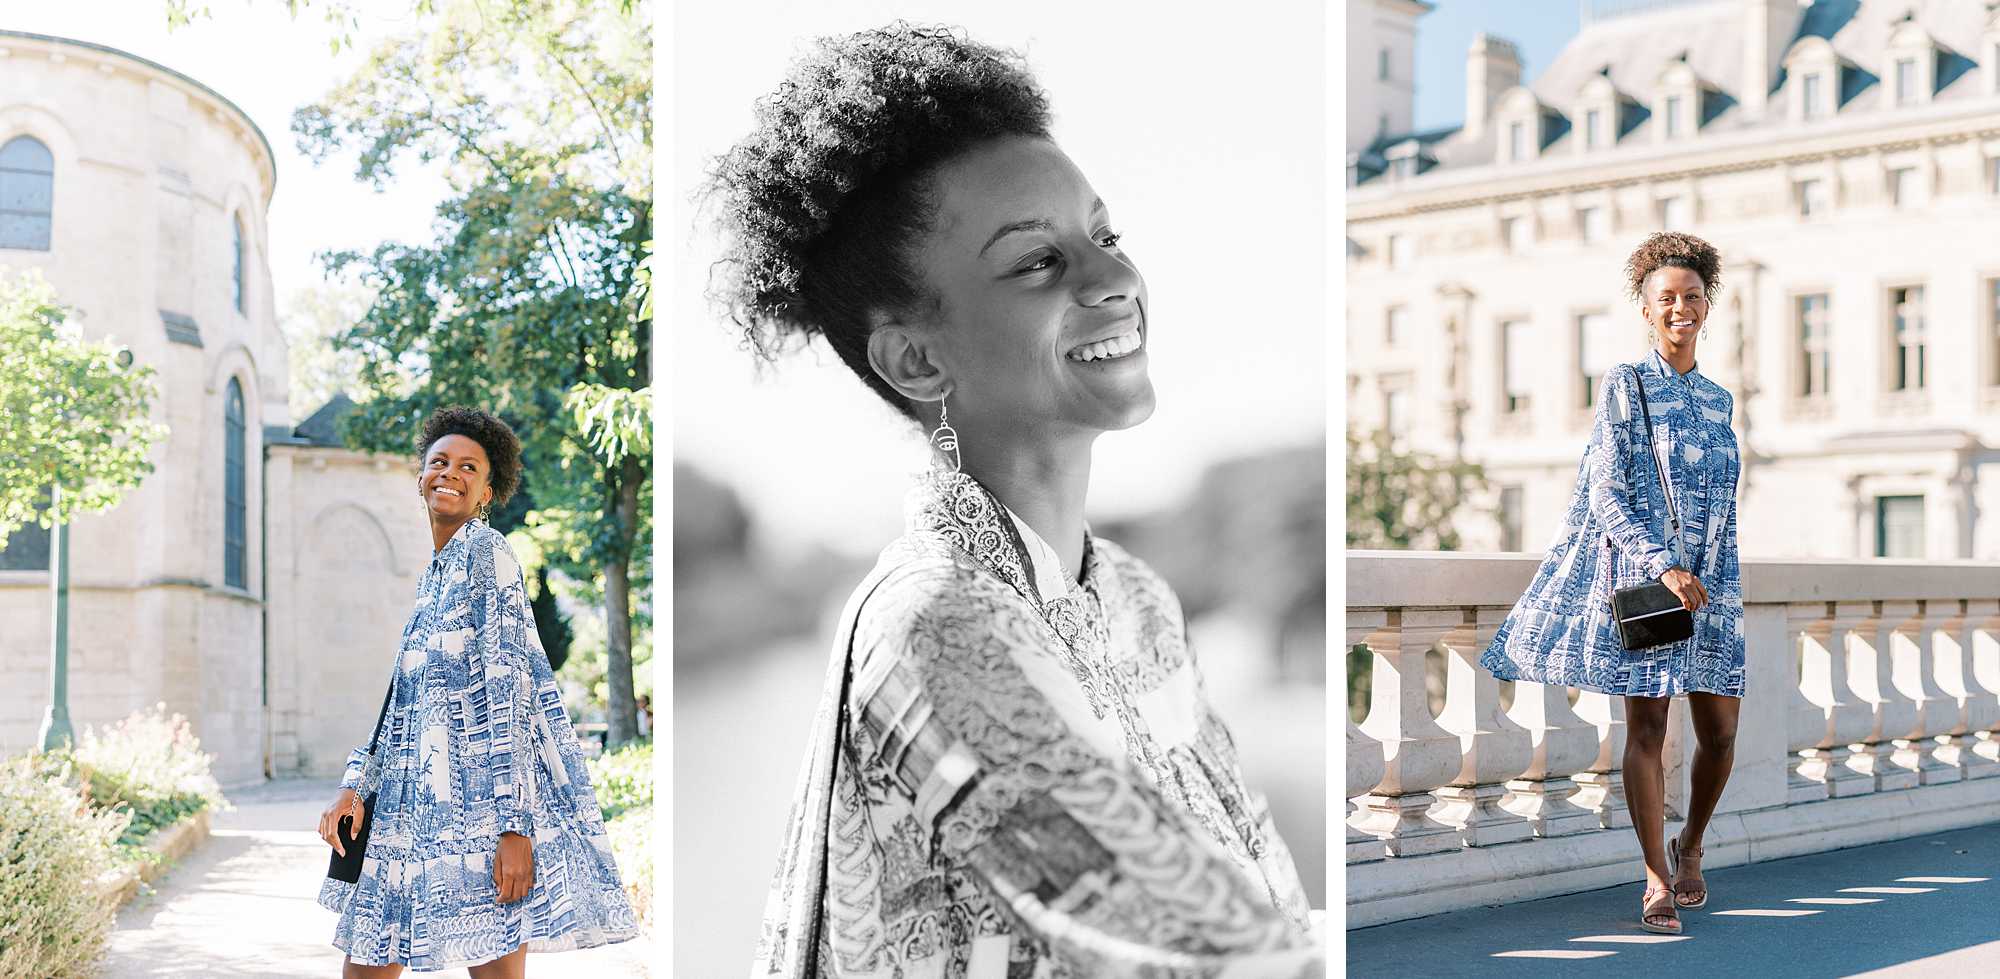 trio of photos from my first photo shoot after lockdown: 3 portraits with Lucie in a blue and white dress in central Paris